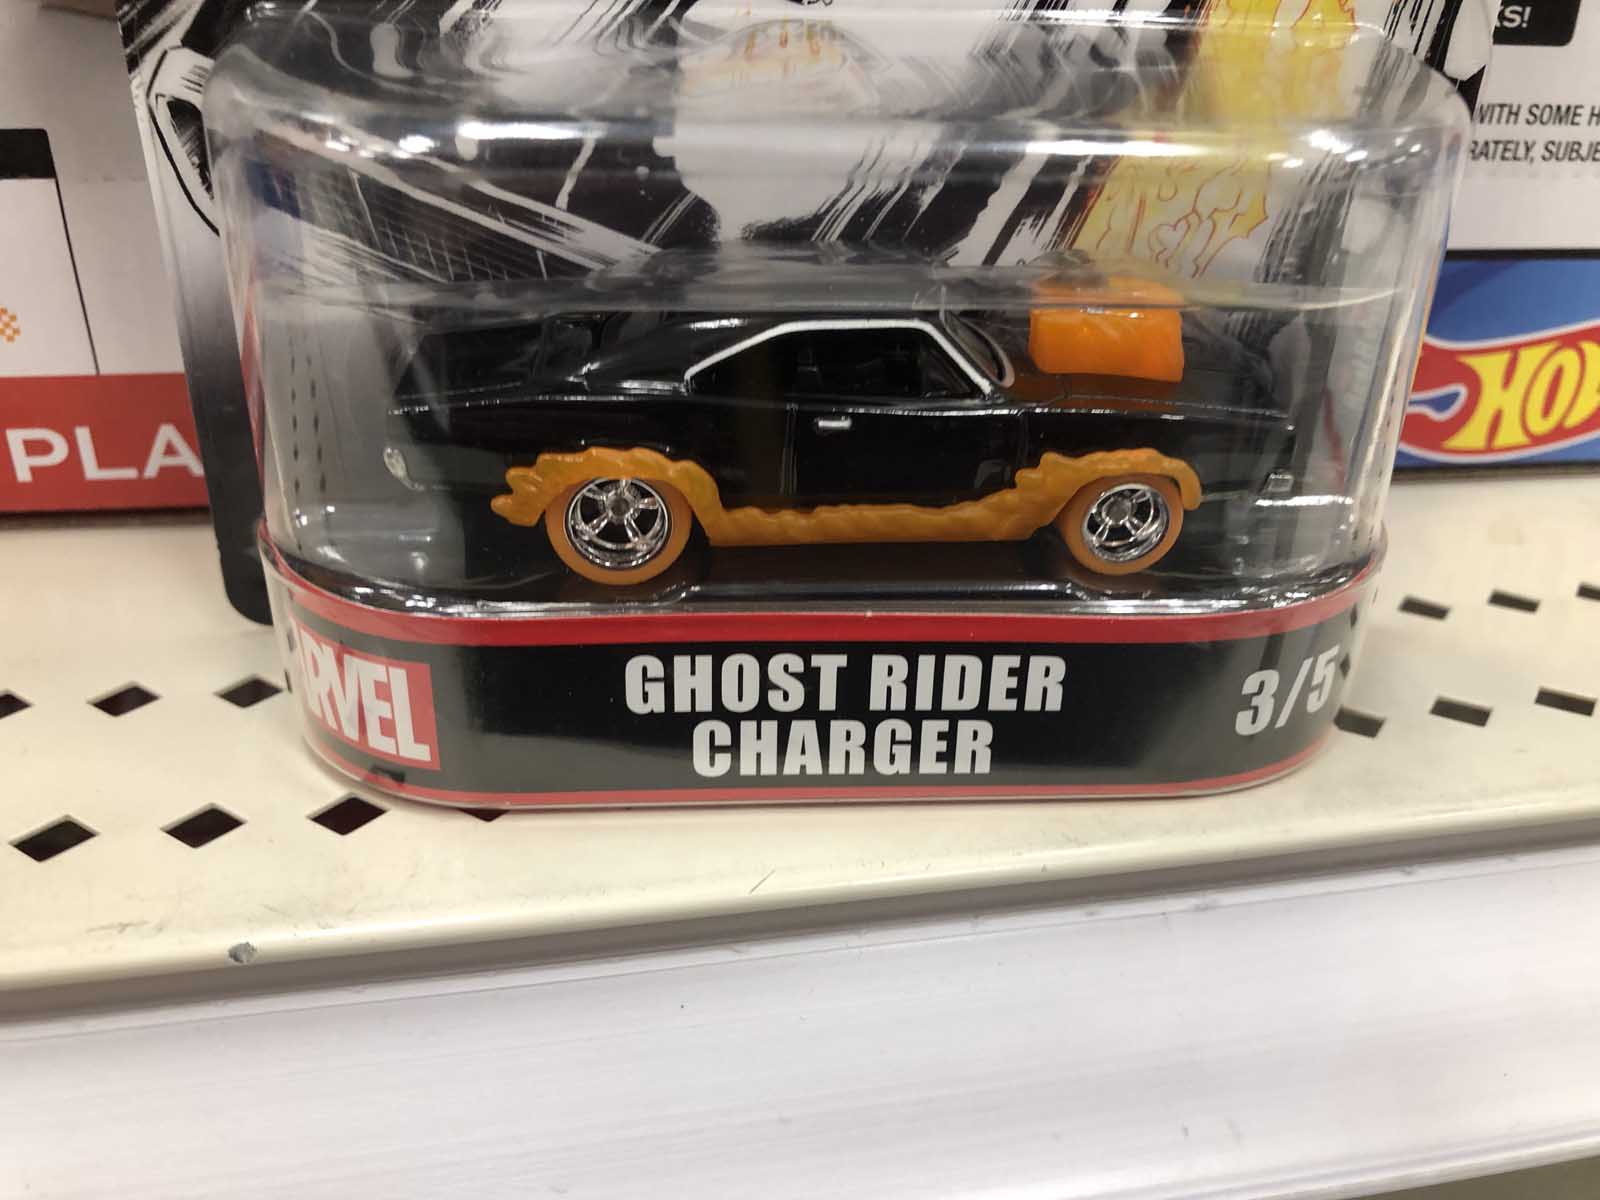 Ghost Rider Charger Hot Wheels